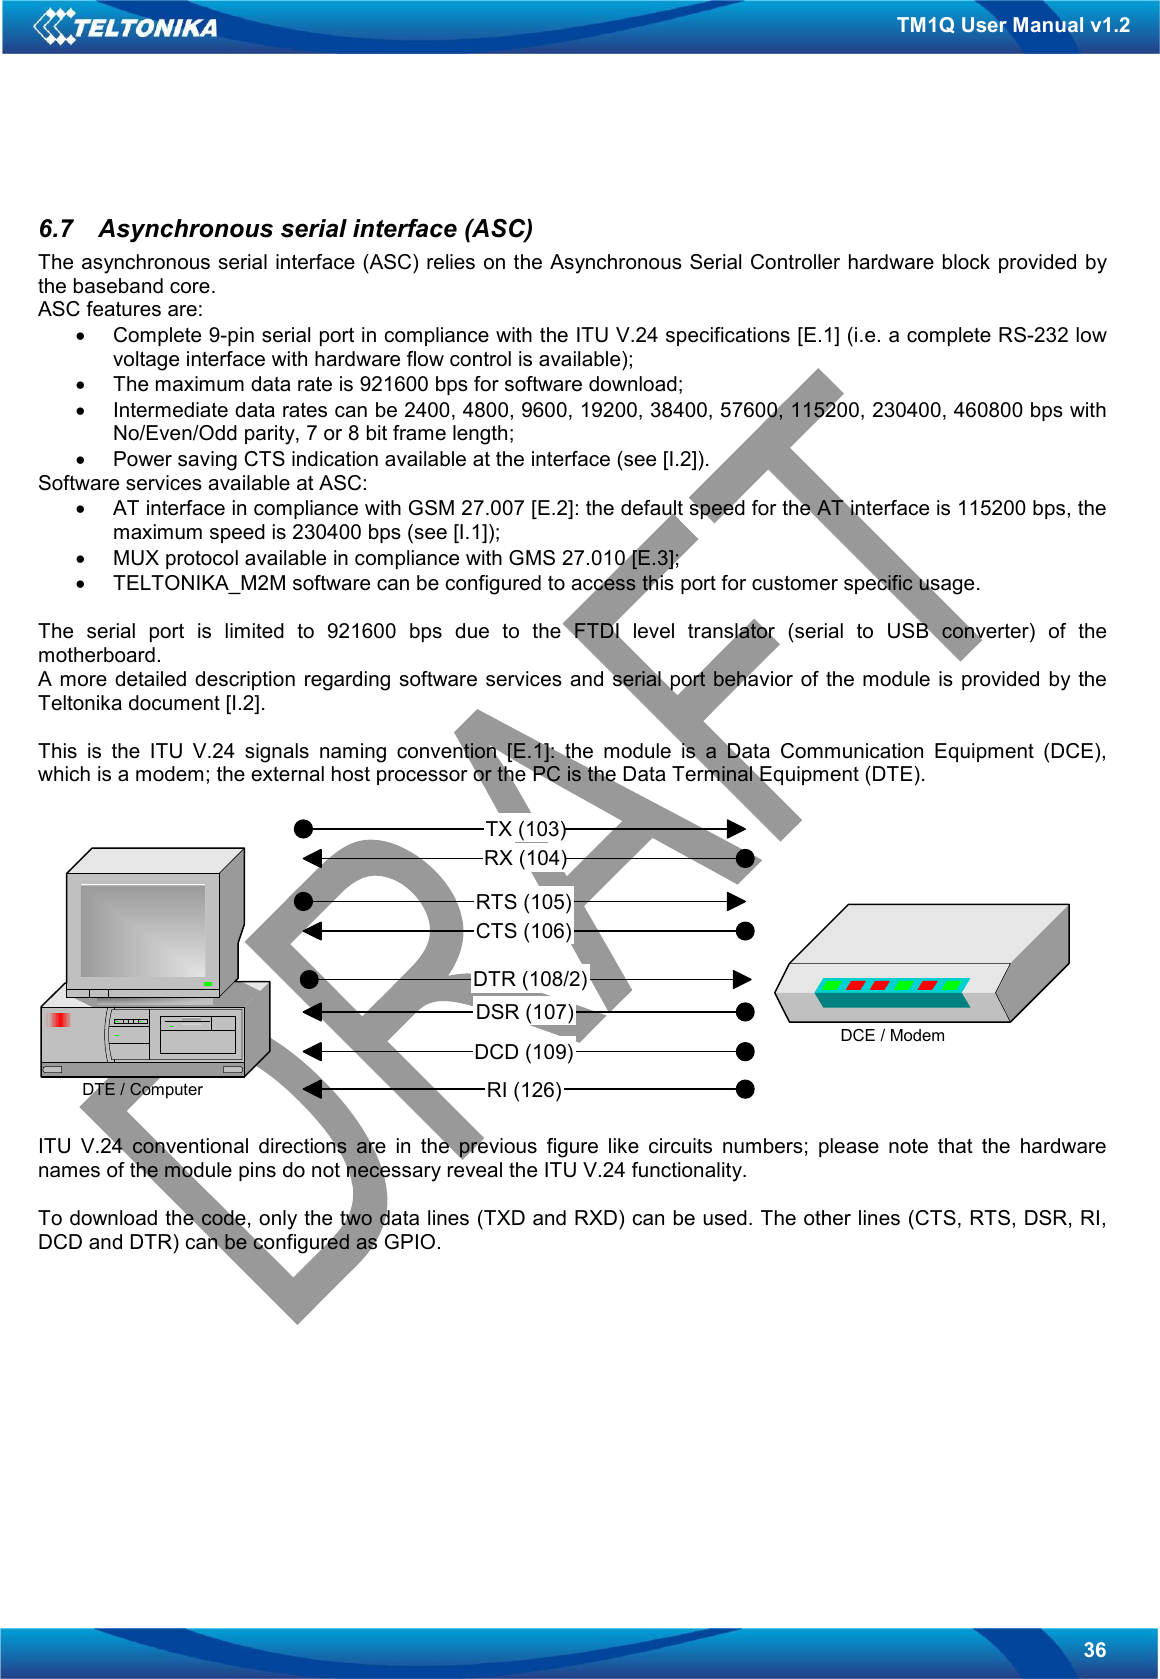   36 TM1Q User Manual v1.2  6.7  Asynchronous serial interface (ASC) The asynchronous serial interface (ASC) relies on the Asynchronous Serial Controller hardware block provided by the baseband core. ASC features are: •  Complete 9-pin serial port in compliance with the ITU V.24 specifications [E.1] (i.e. a complete RS-232 low voltage interface with hardware flow control is available); •  The maximum data rate is 921600 bps for software download; •  Intermediate data rates can be 2400, 4800, 9600, 19200, 38400, 57600, 115200, 230400, 460800 bps with No/Even/Odd parity, 7 or 8 bit frame length; •  Power saving CTS indication available at the interface (see [I.2]). Software services available at ASC: •  AT interface in compliance with GSM 27.007 [E.2]: the default speed for the AT interface is 115200 bps, the maximum speed is 230400 bps (see [I.1]); •  MUX protocol available in compliance with GMS 27.010 [E.3]; •  TELTONIKA_M2M software can be configured to access this port for customer specific usage.  The  serial  port  is  limited  to  921600  bps  due  to  the  FTDI  level  translator  (serial  to  USB  converter)  of  the motherboard.  A more detailed description  regarding software services and  serial port behavior of the module is provided  by the Teltonika document [I.2].  This  is  the  ITU  V.24  signals  naming  convention  [E.1]:  the  module  is  a  Data  Communication  Equipment  (DCE), which is a modem; the external host processor or the PC is the Data Terminal Equipment (DTE).    ITU  V.24  conventional  directions  are  in  the  previous  figure  like  circuits  numbers;  please  note  that  the  hardware names of the module pins do not necessary reveal the ITU V.24 functionality.  To download the code, only the two data lines (TXD and RXD) can be used. The other lines (CTS, RTS, DSR, RI, DCD and DTR) can be configured as GPIO.  DTE / ComputerDCE / ModemTX (103) RX (104) RTS (105) CTS (106) DTR (108/2) DSR (107) DCD (109) RI (126) 